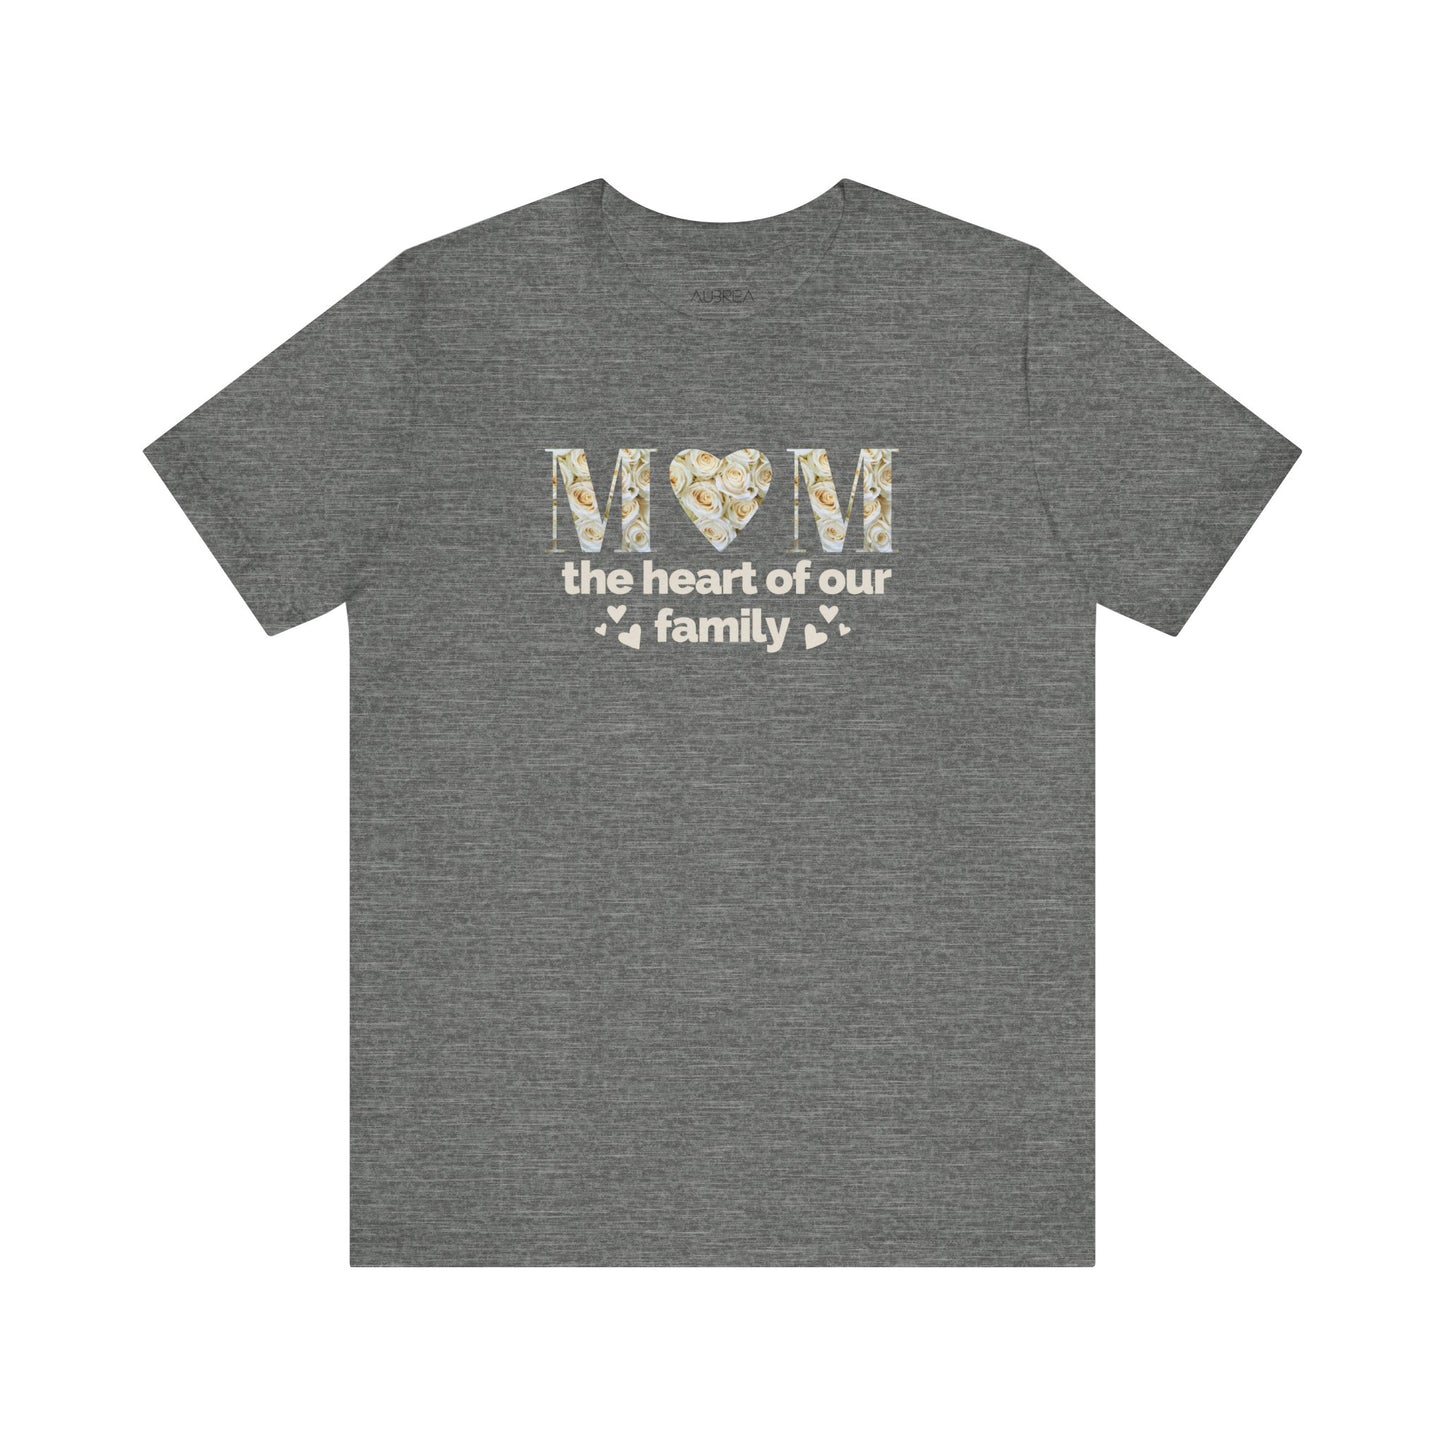 MOM: THE HEART OF OUR FAMILY TEE